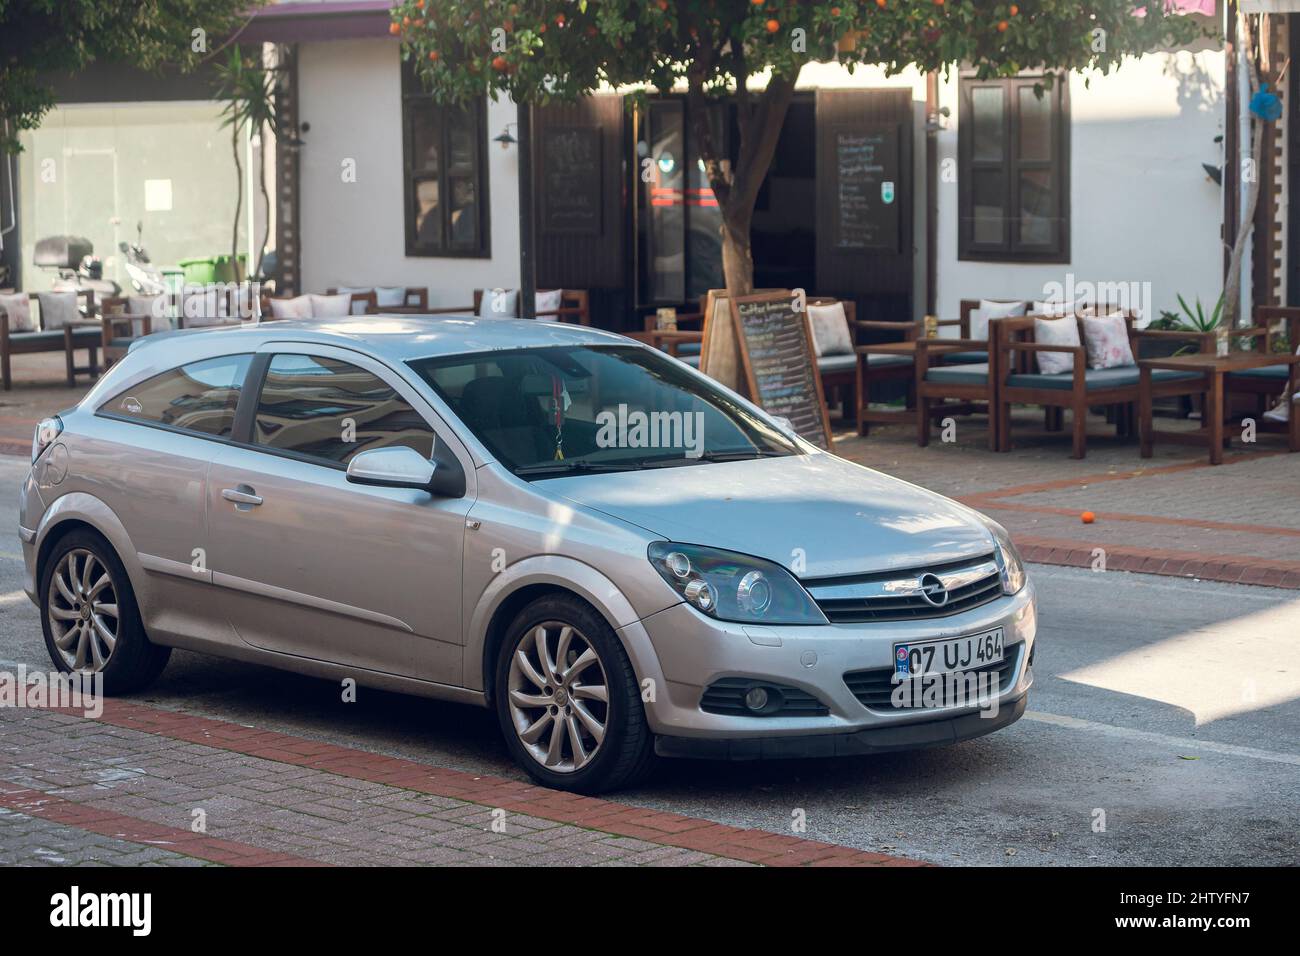 OPEL ASTRA opel-astra-h-limo-tuning Used - the parking